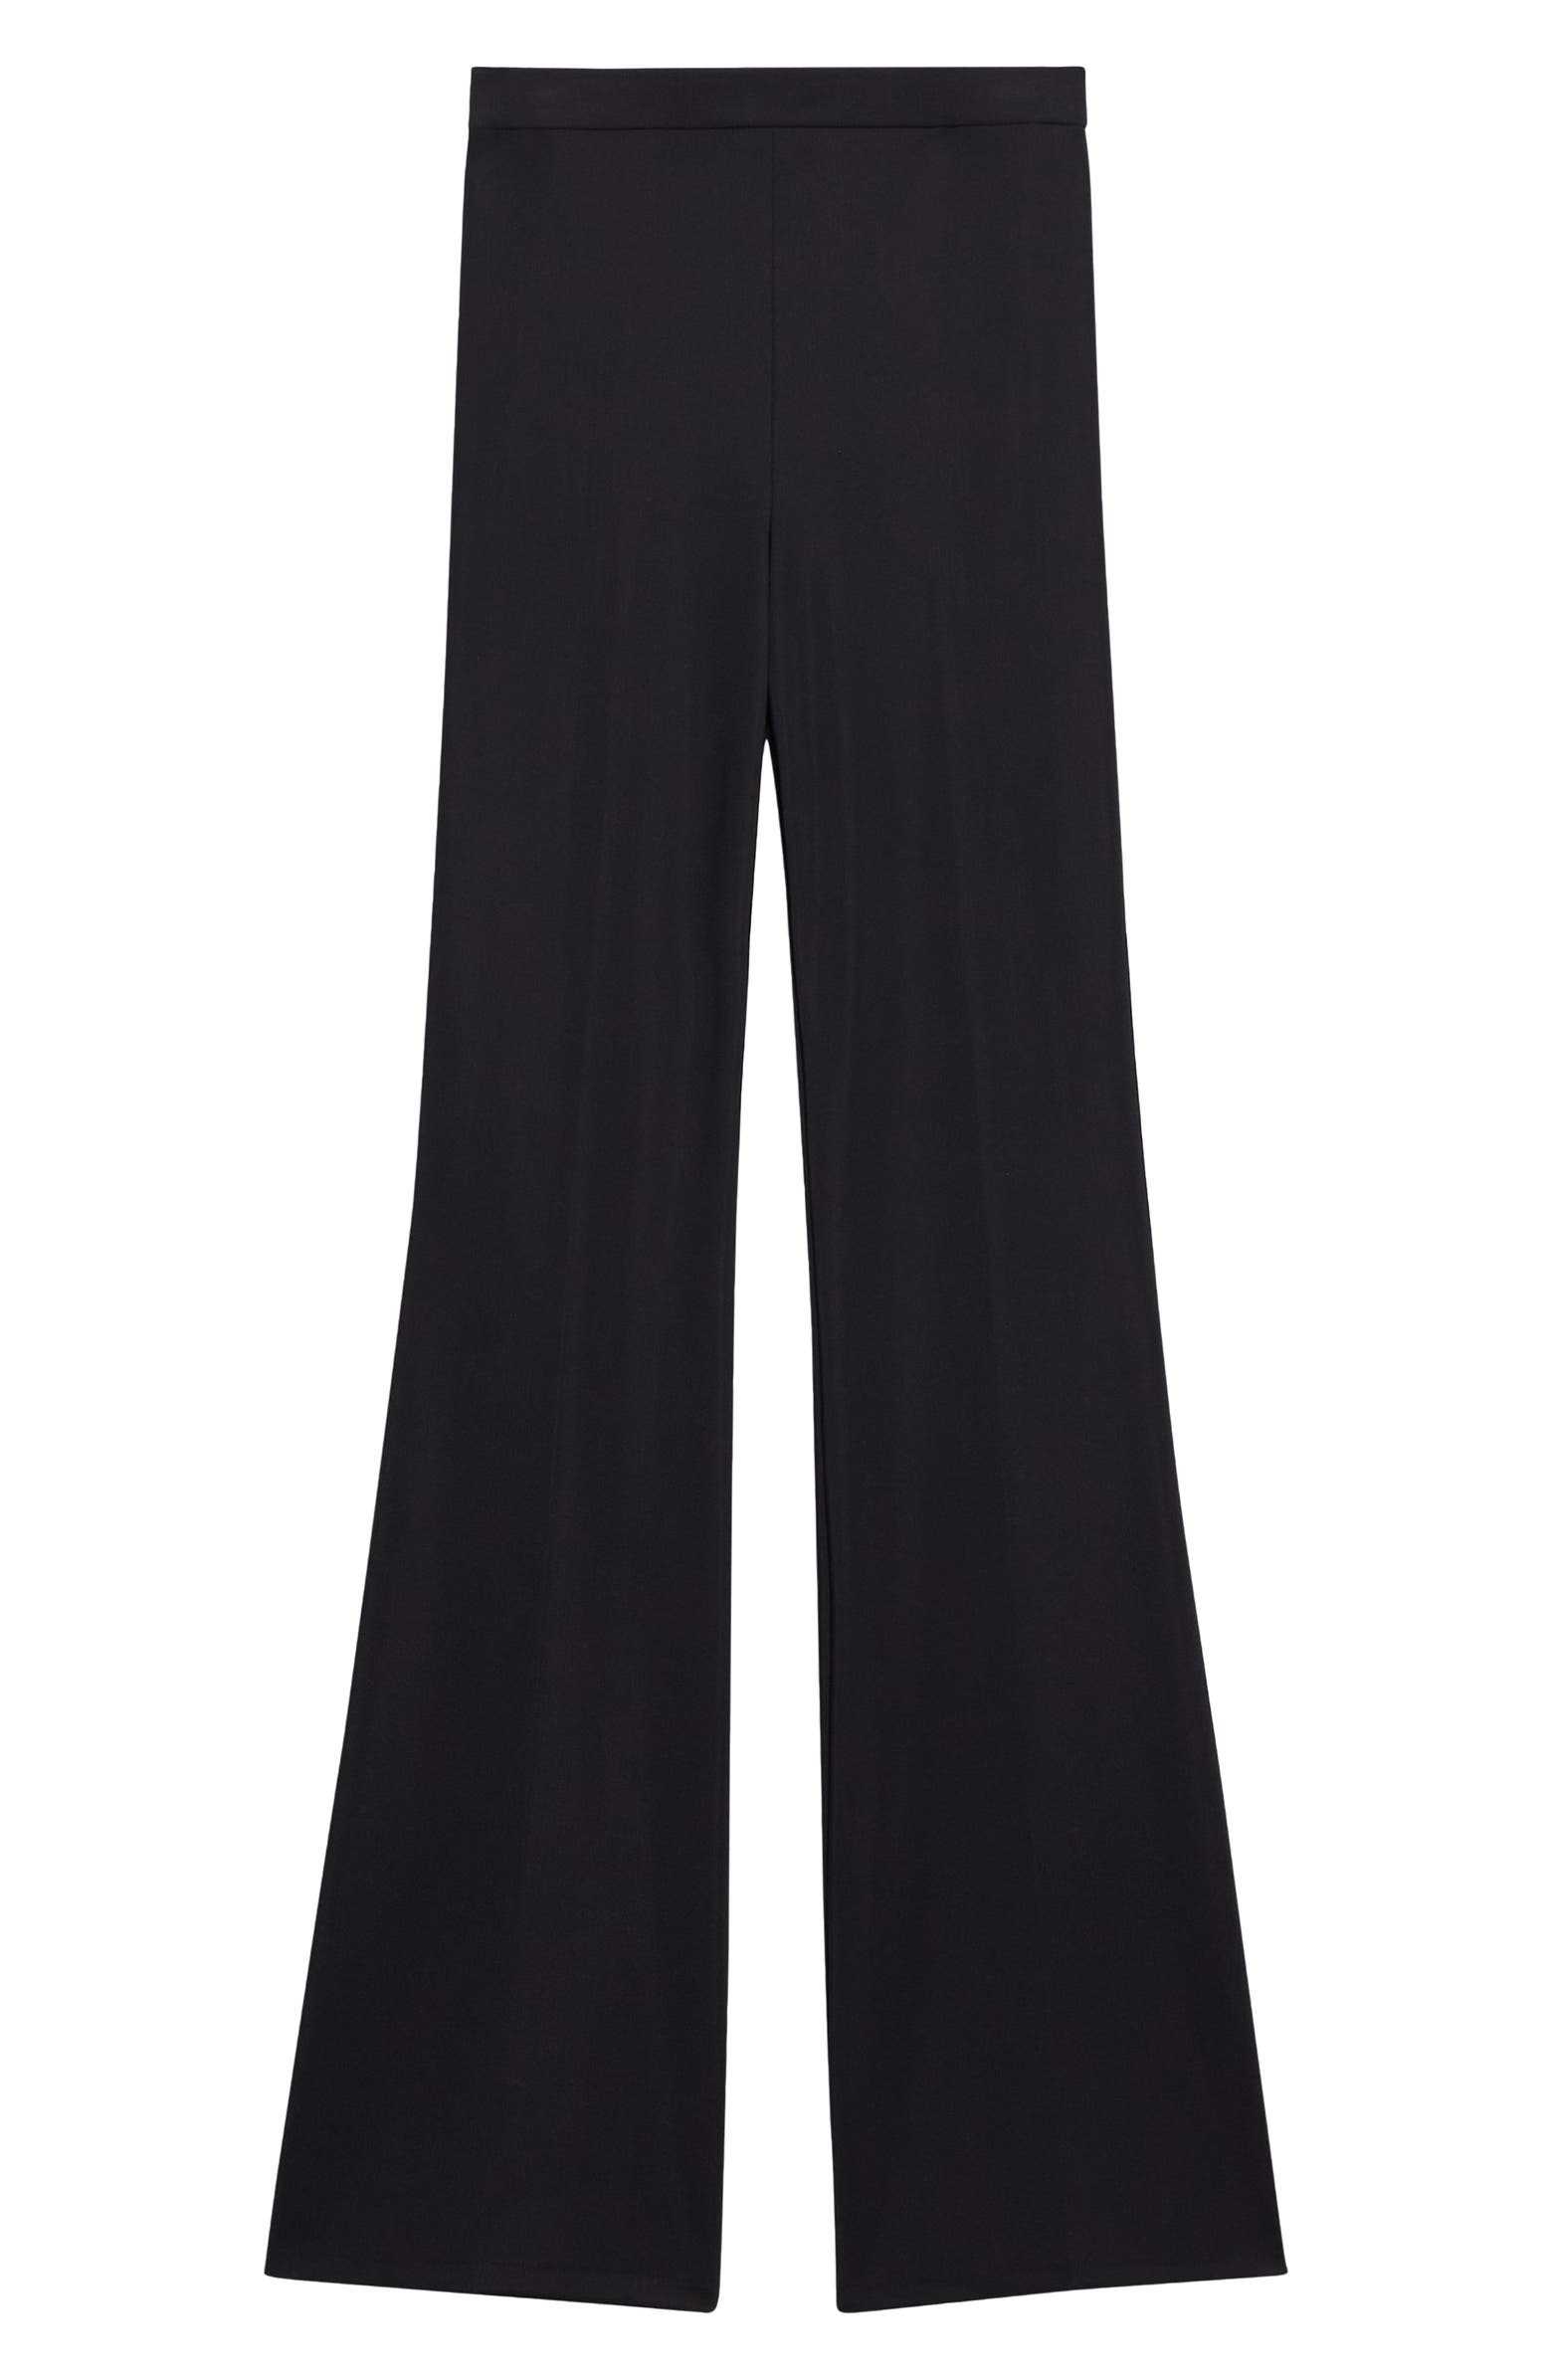 Theory Precision High Waist Flare Ponte Pants | Nordstrom